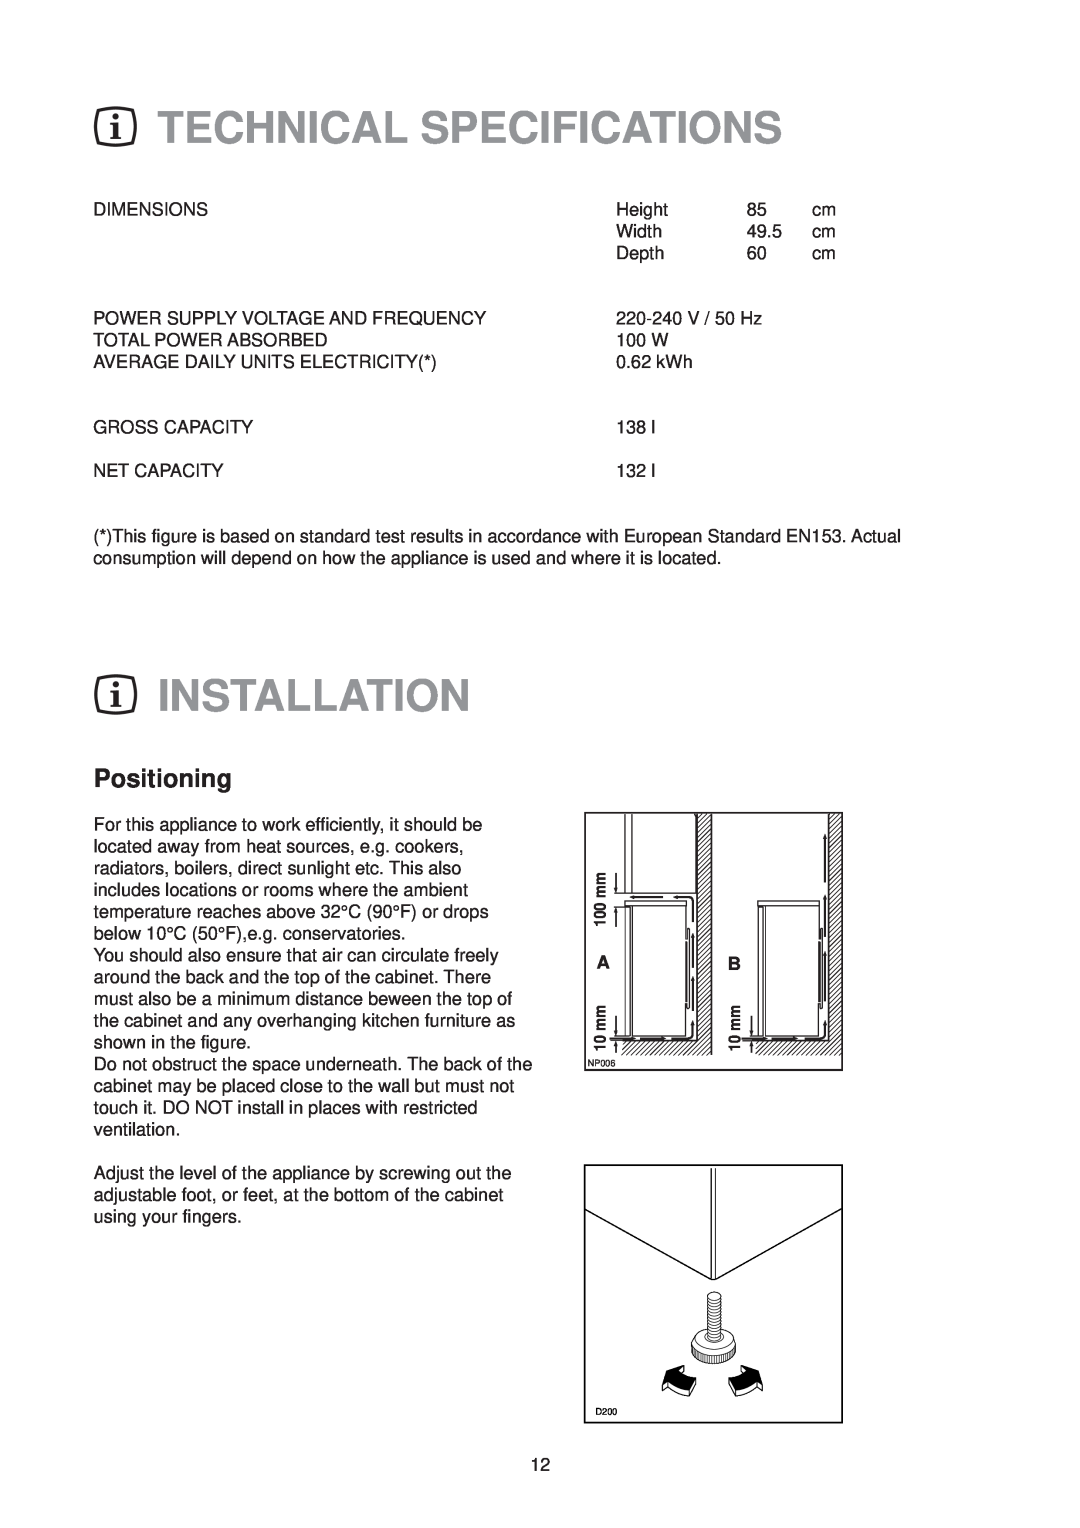 Zanussi ZT 51 RL manual Technical Specifications, Installation, Positioning 